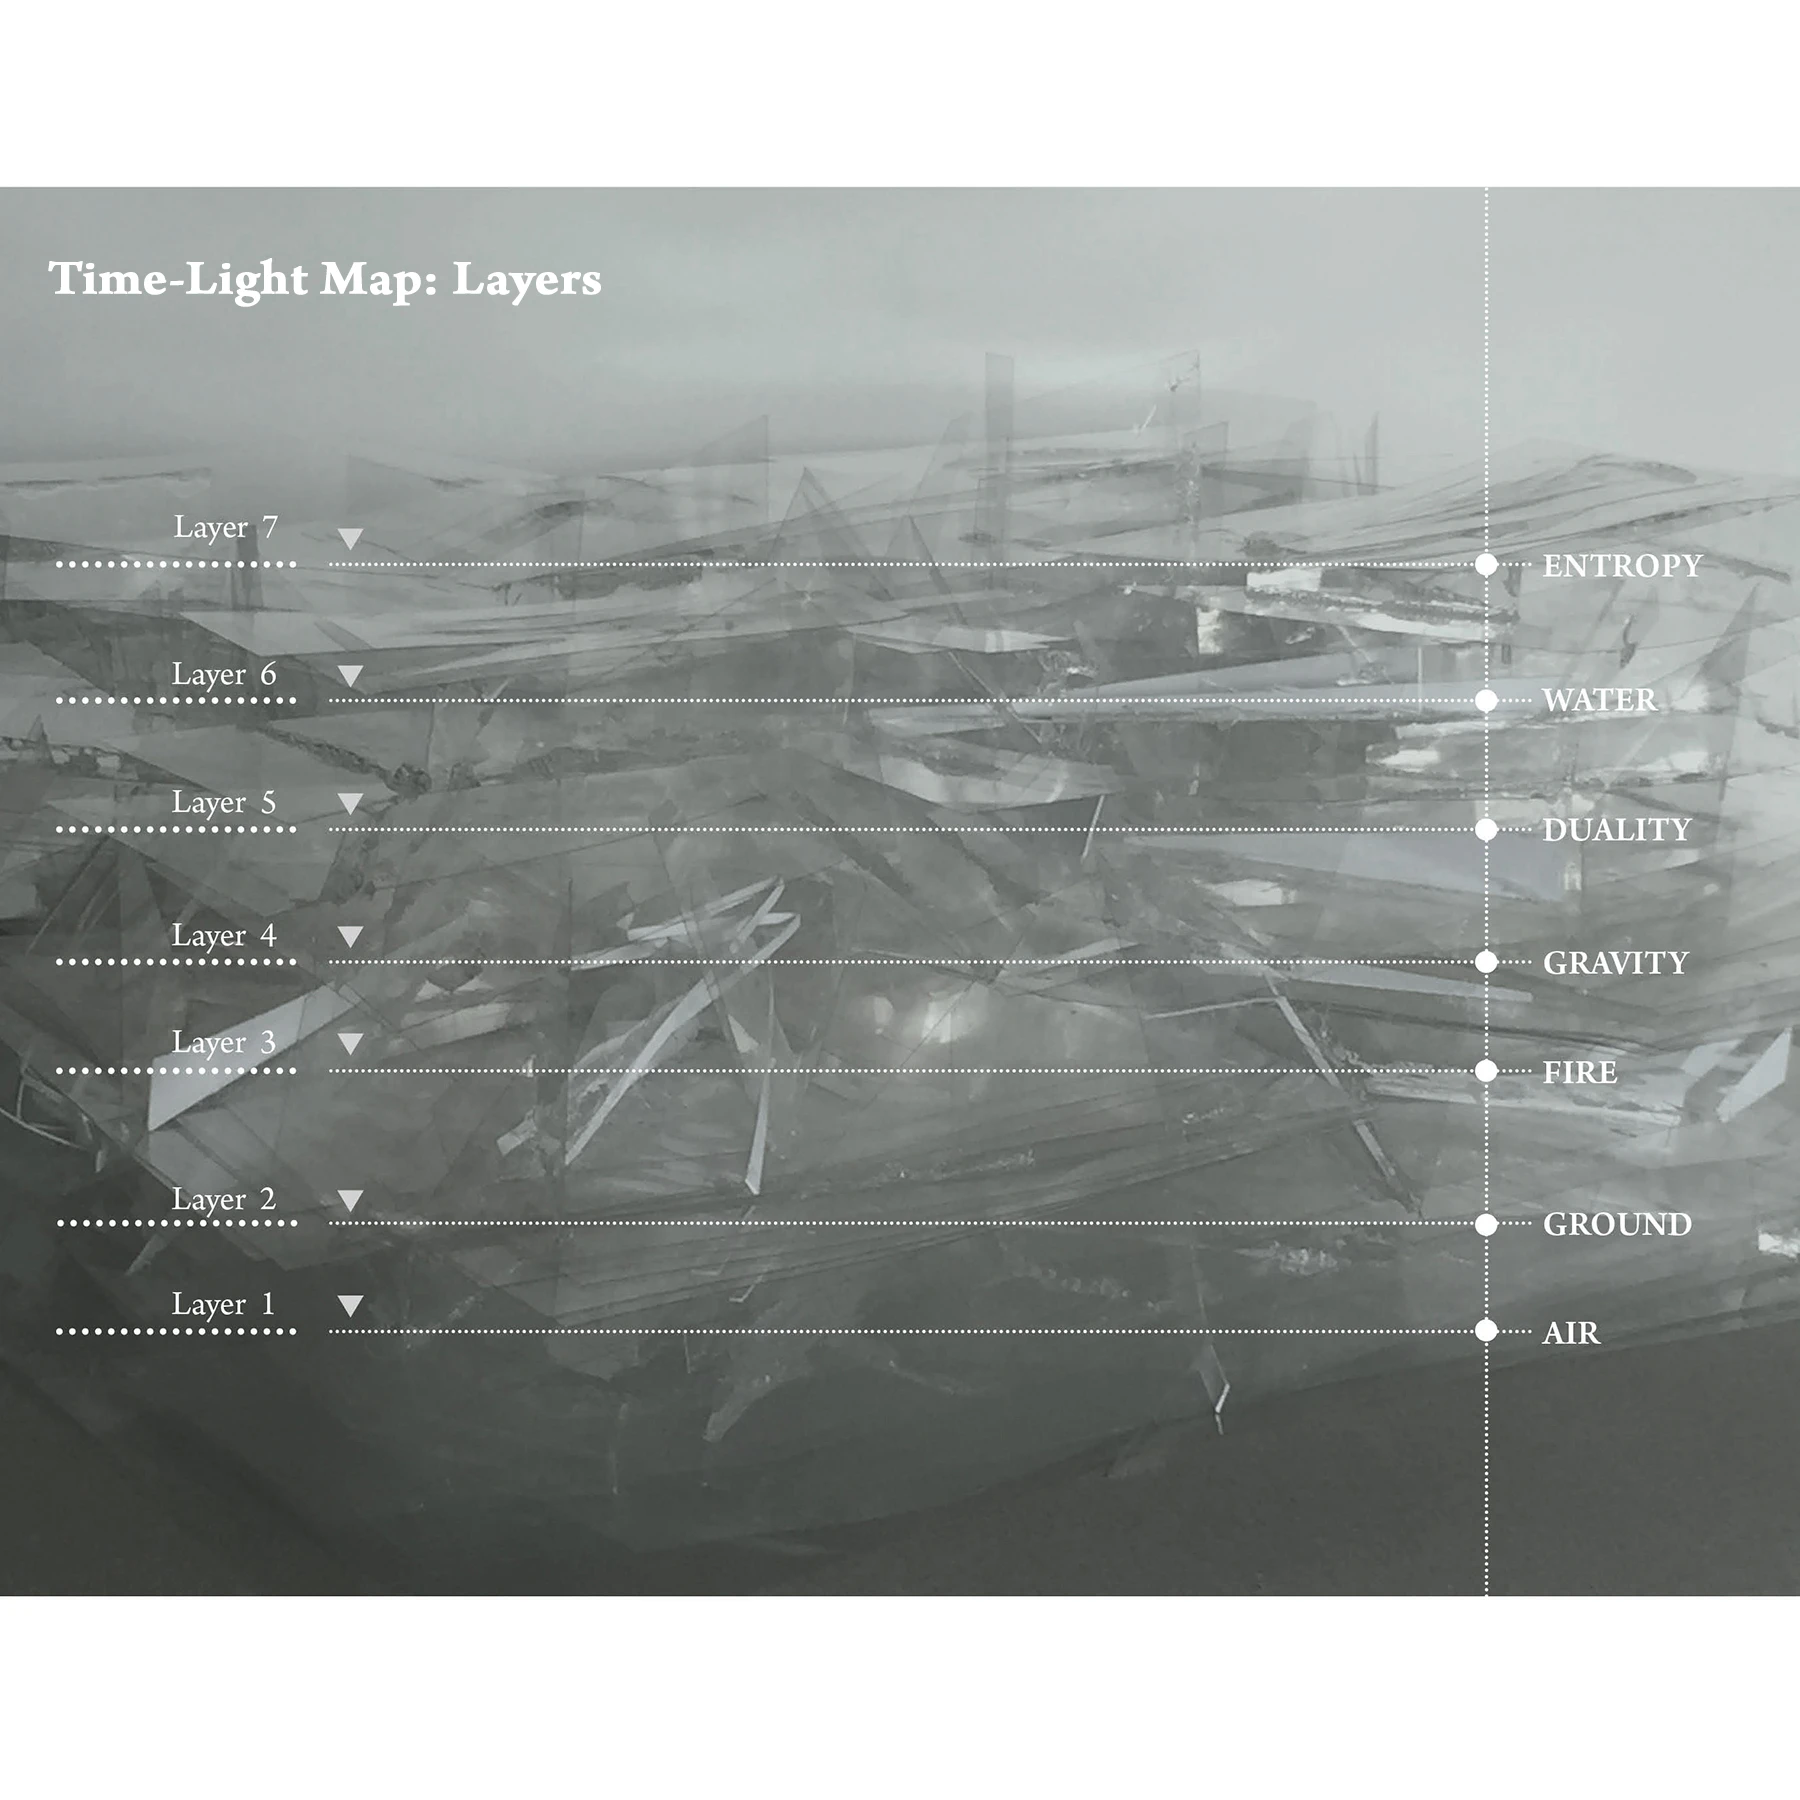 Time-Light Map: Layers